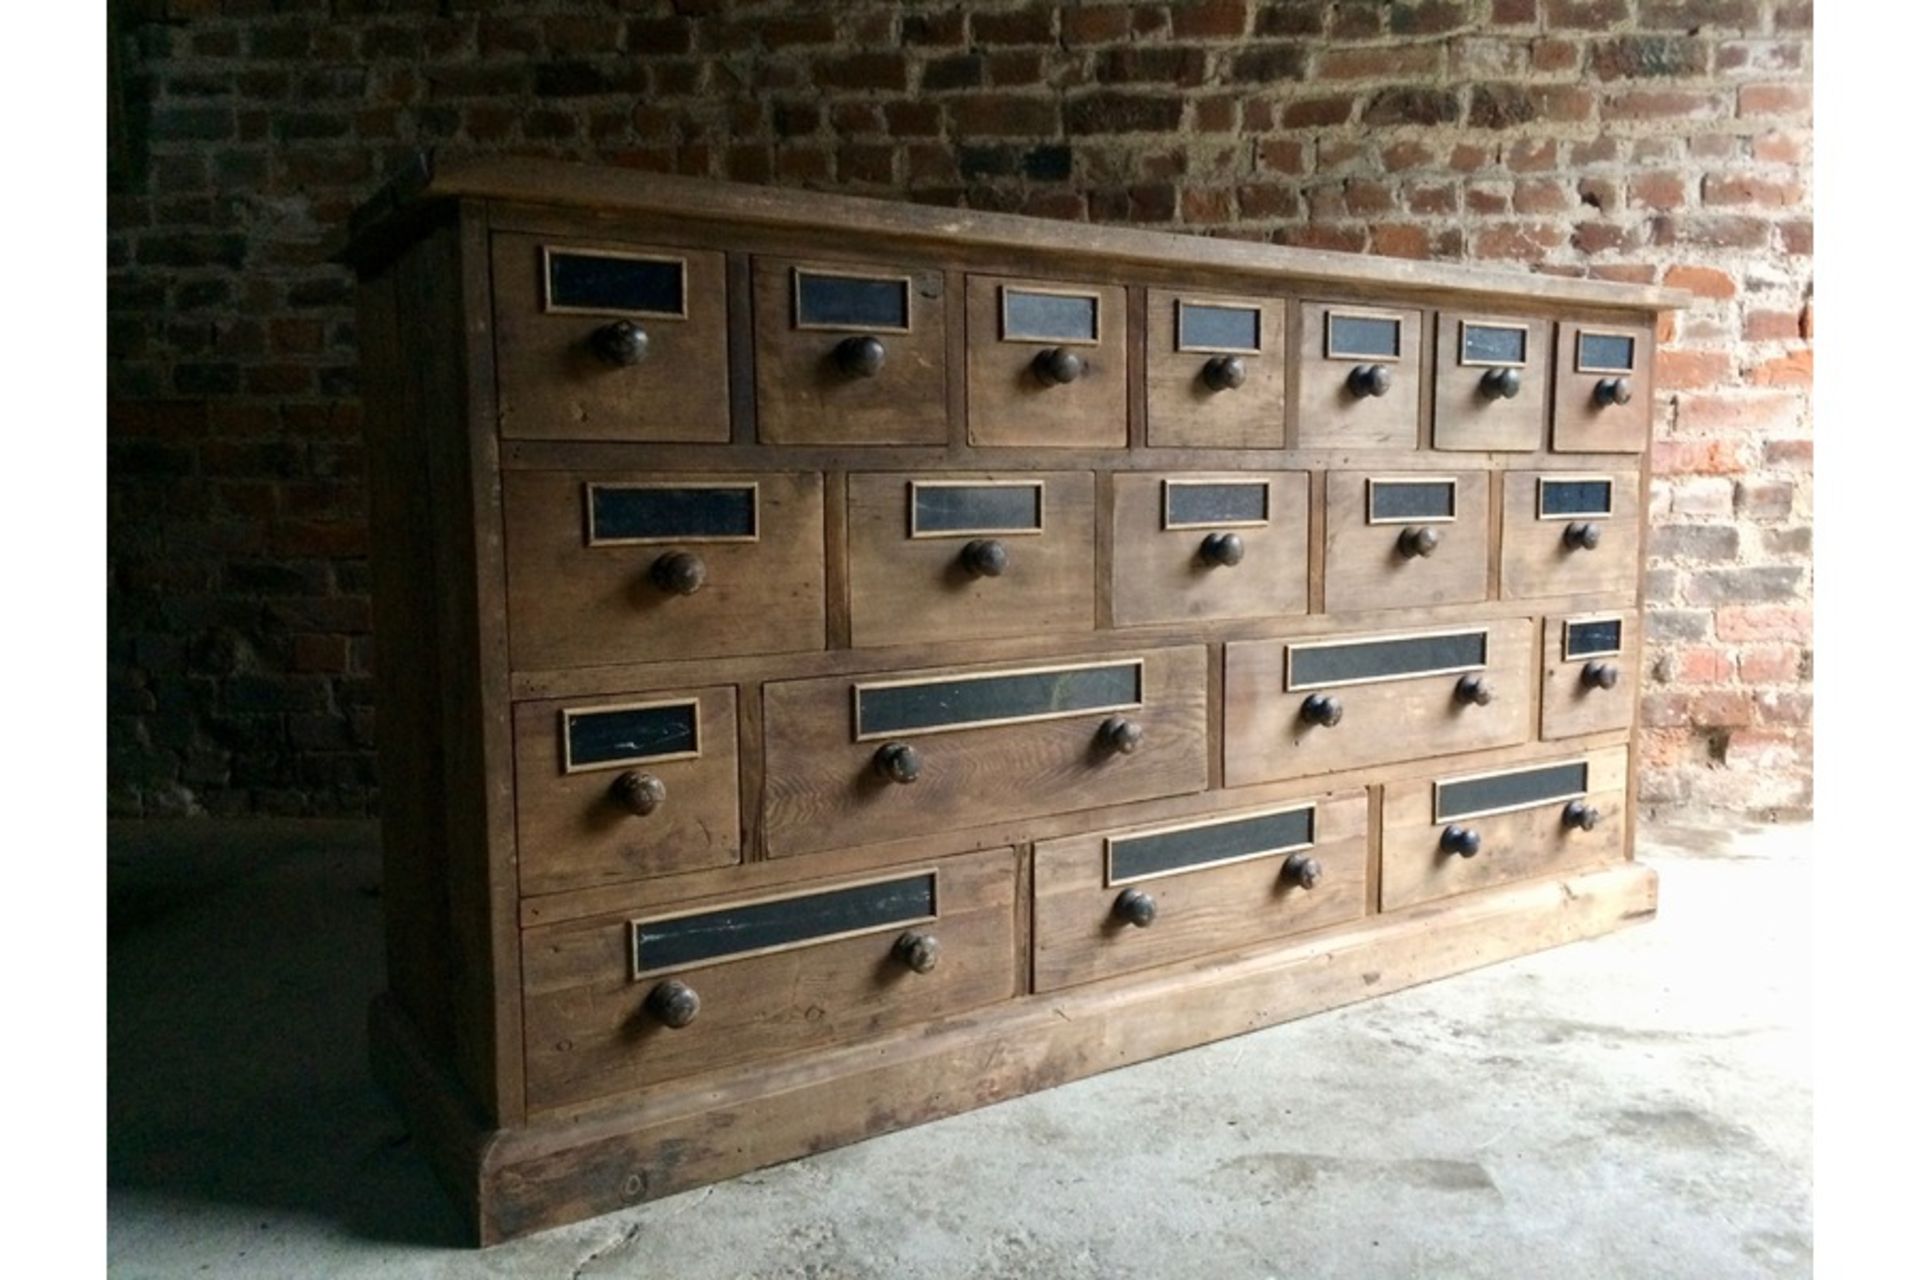 Bank 30 Drawers Tavern Drawing its inspirations from the shelving and display units used in banks of